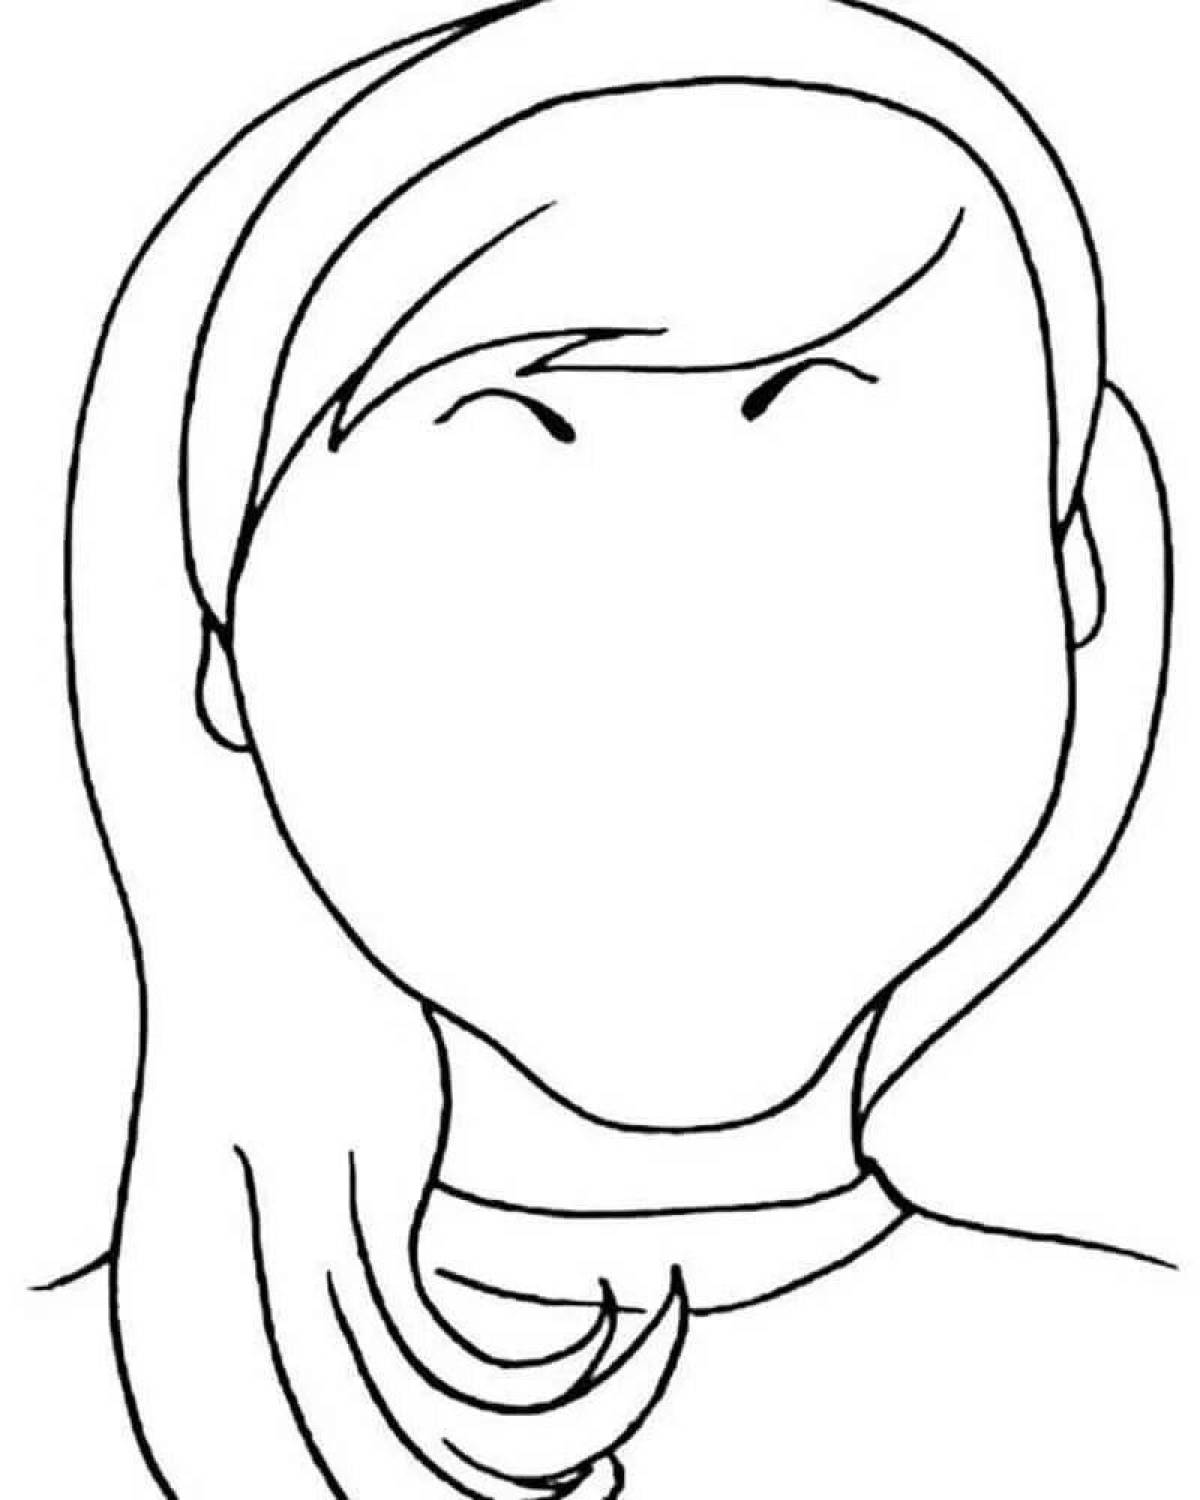 Creative face coloring page for kids